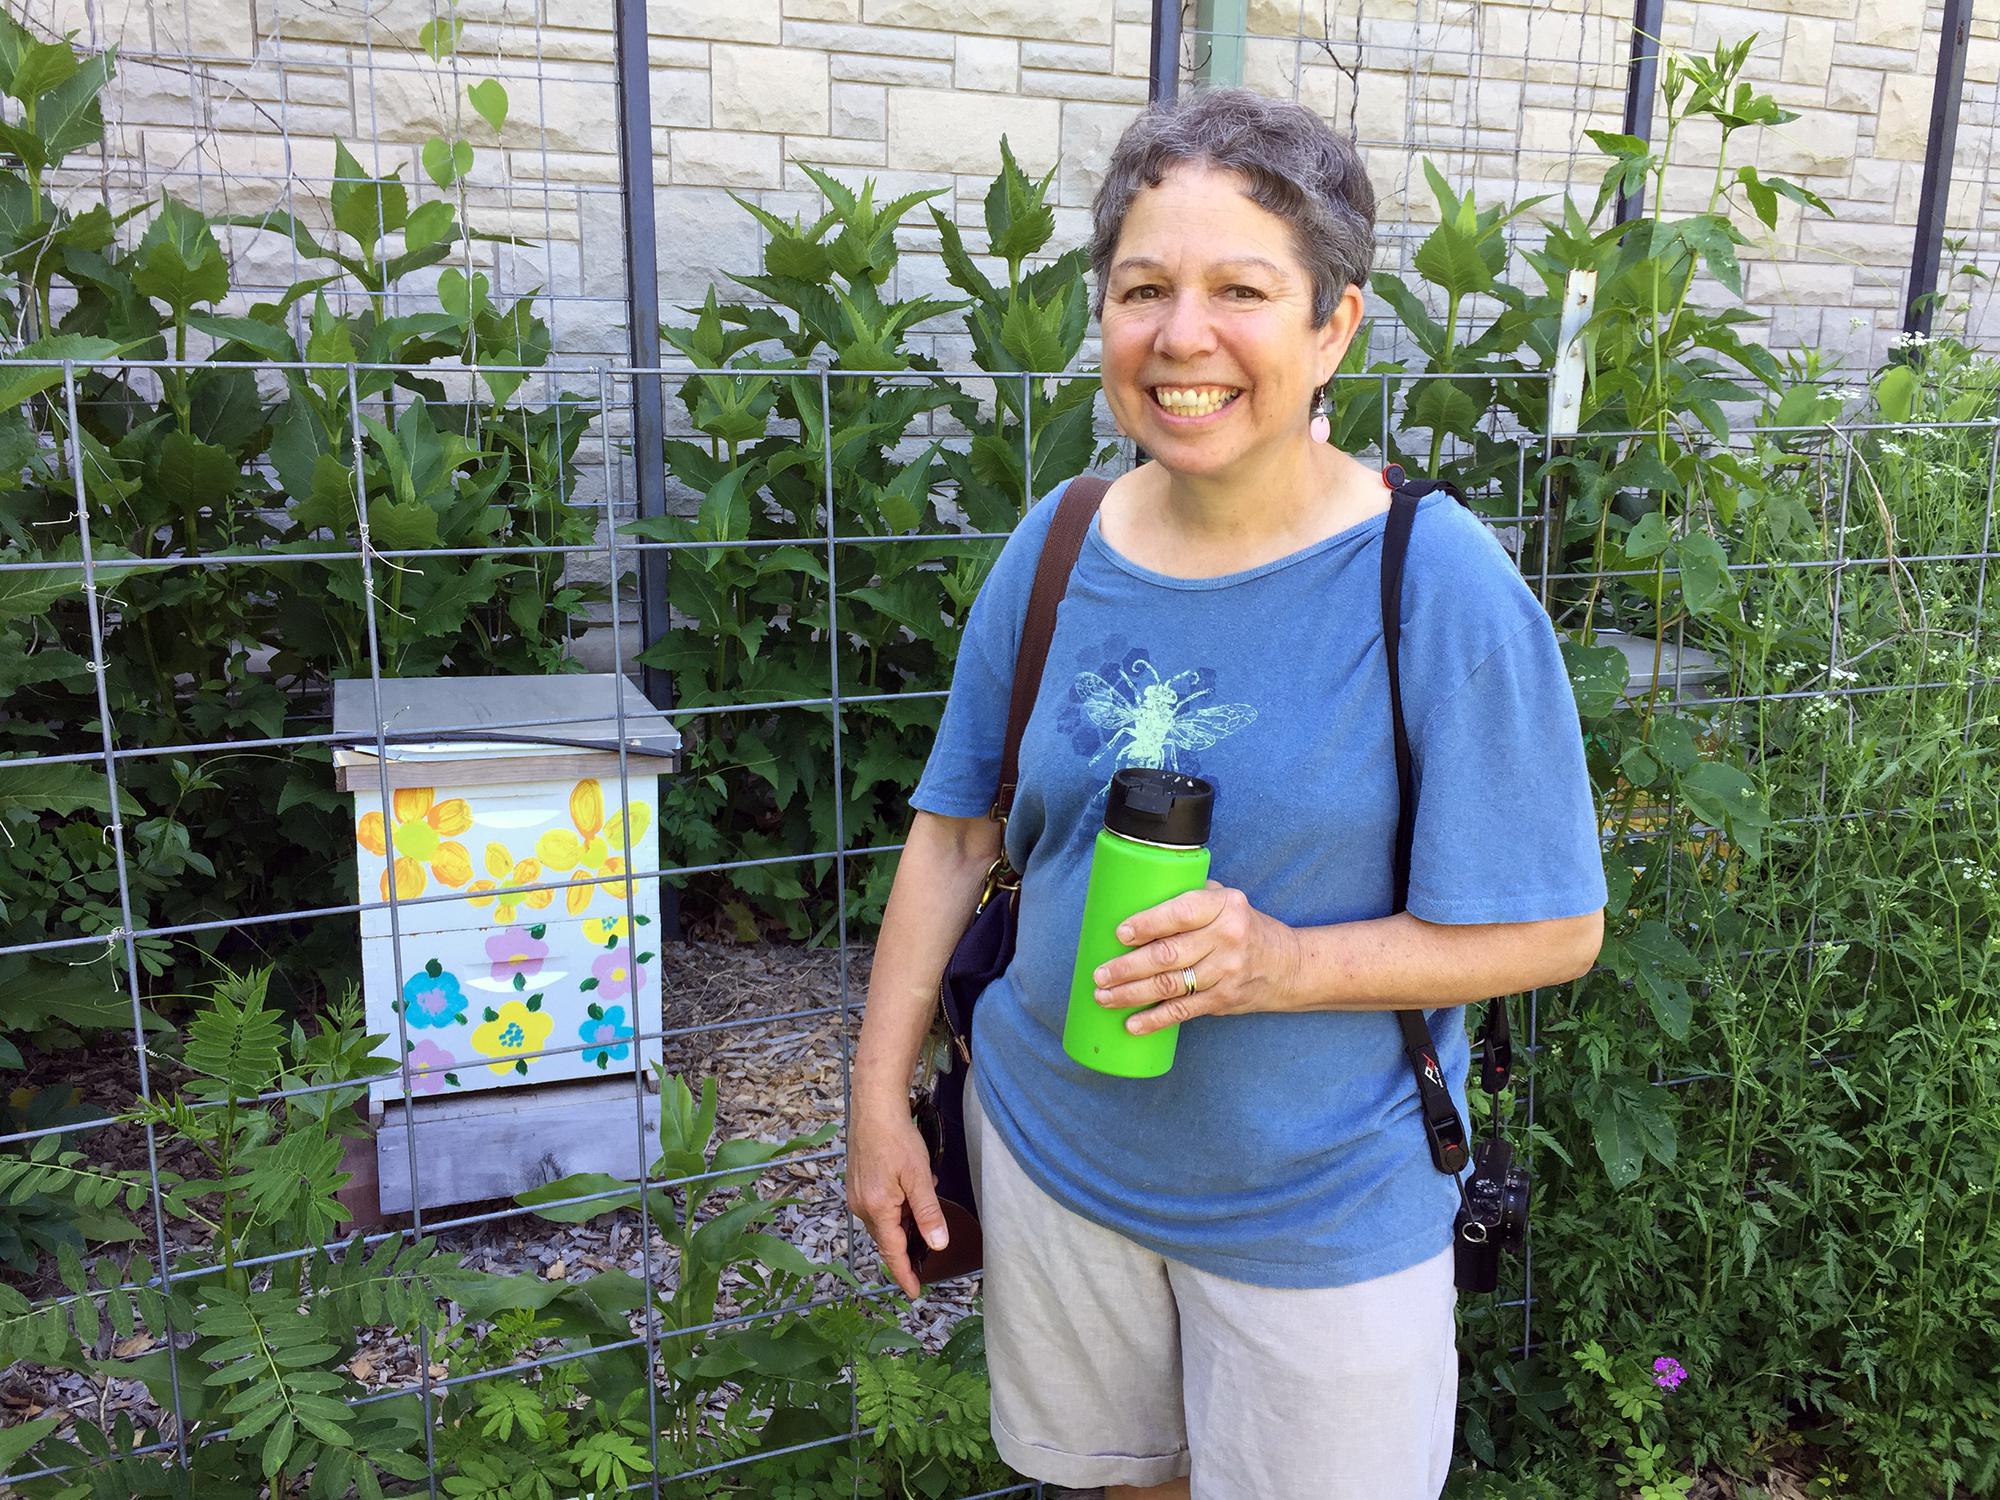 Candi Galen, a University of Missouri biology professor, is studying a way to help farmers identify pollination activity in their fields.